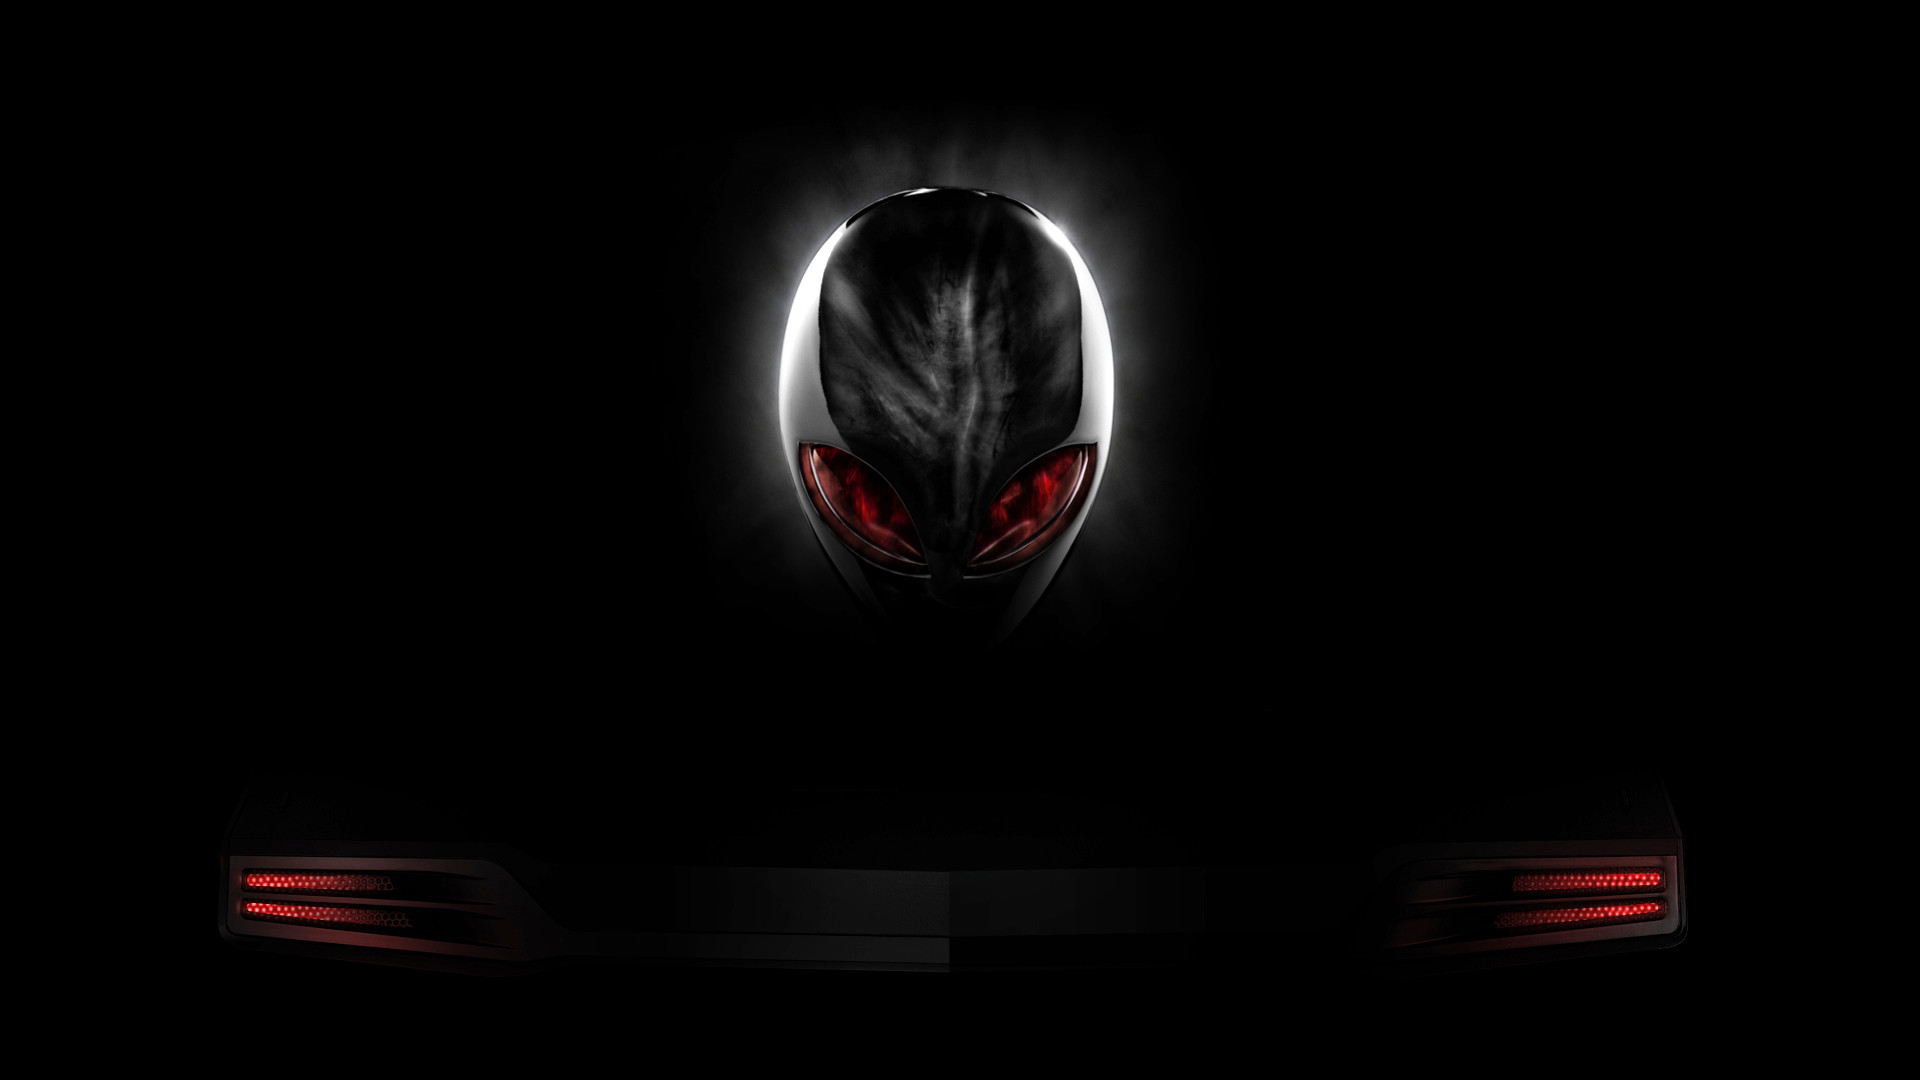 Red And Black Wallpaper 1080p Alienware red eyes logo black